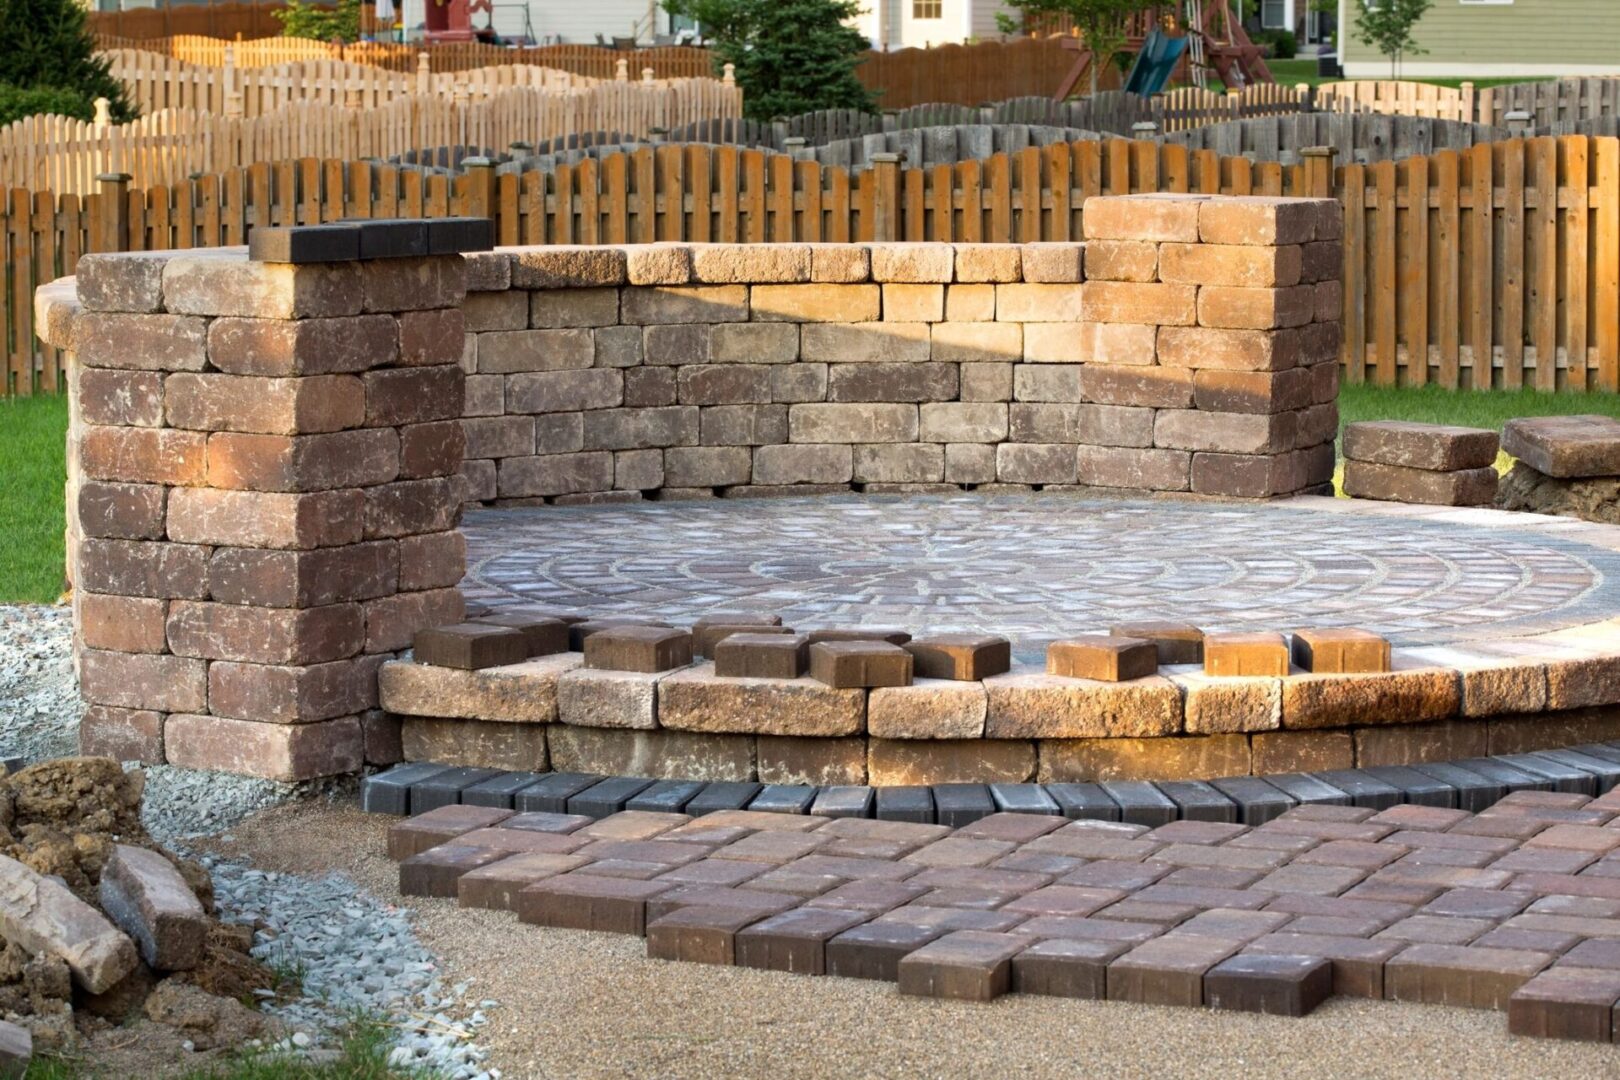 A brick patio with steps and a stone wall.